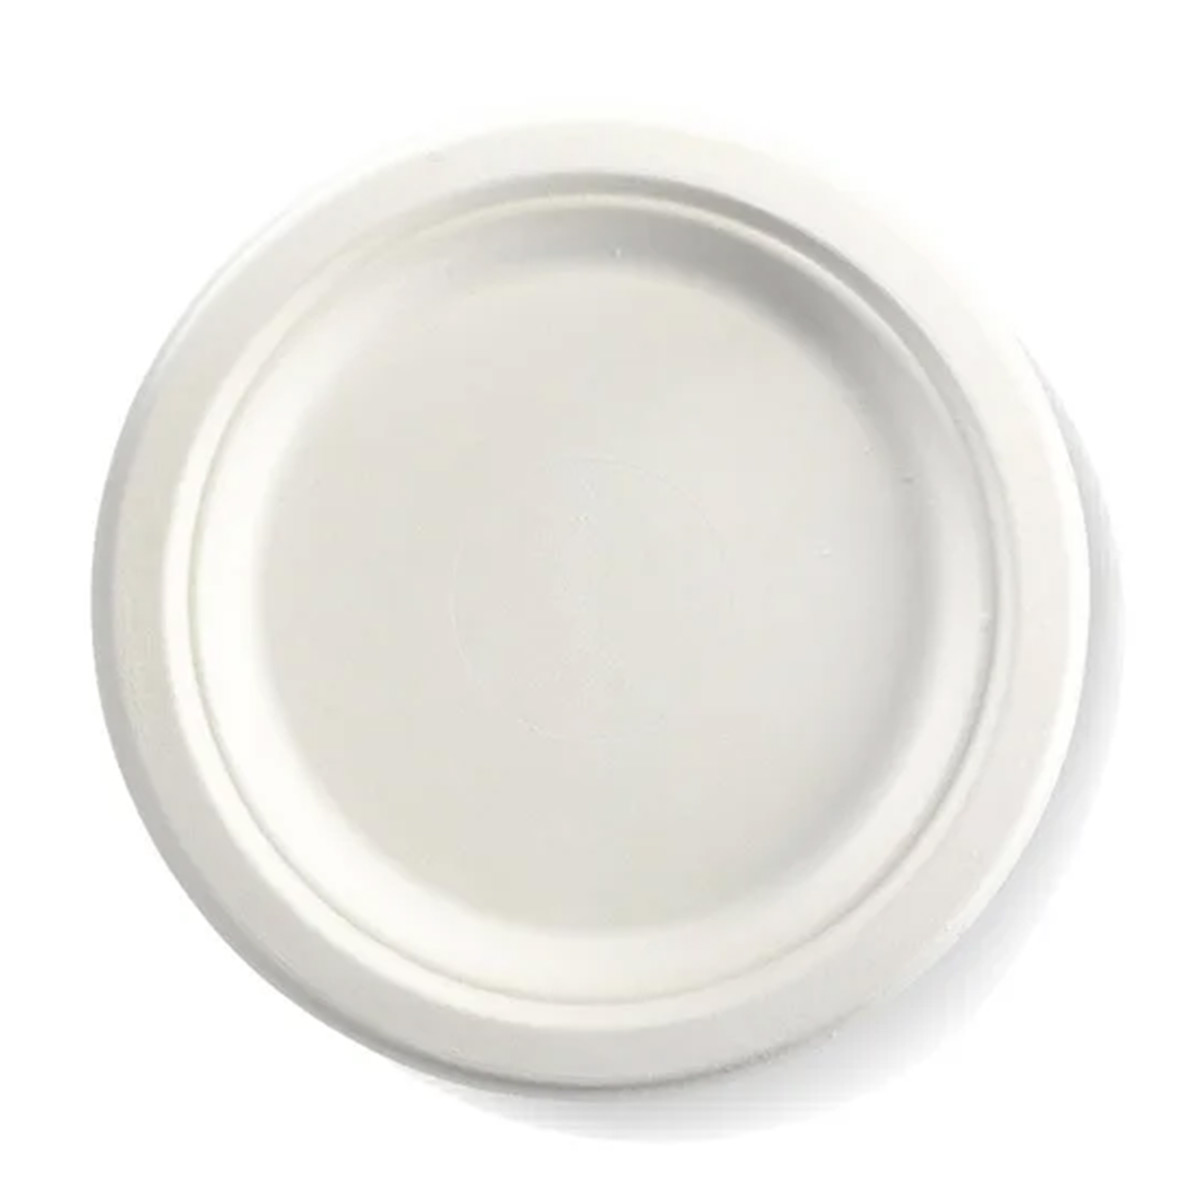 consumables-hospitality-packaging-biocane-plate-18cm-7inch-round-x-1000-plant-fibre-reclaimed-rapidly-renewable-sugarcane-pulp-microwave-oven-friendly-vjs-distributors-hawkes-bay-nz-B-PL-07